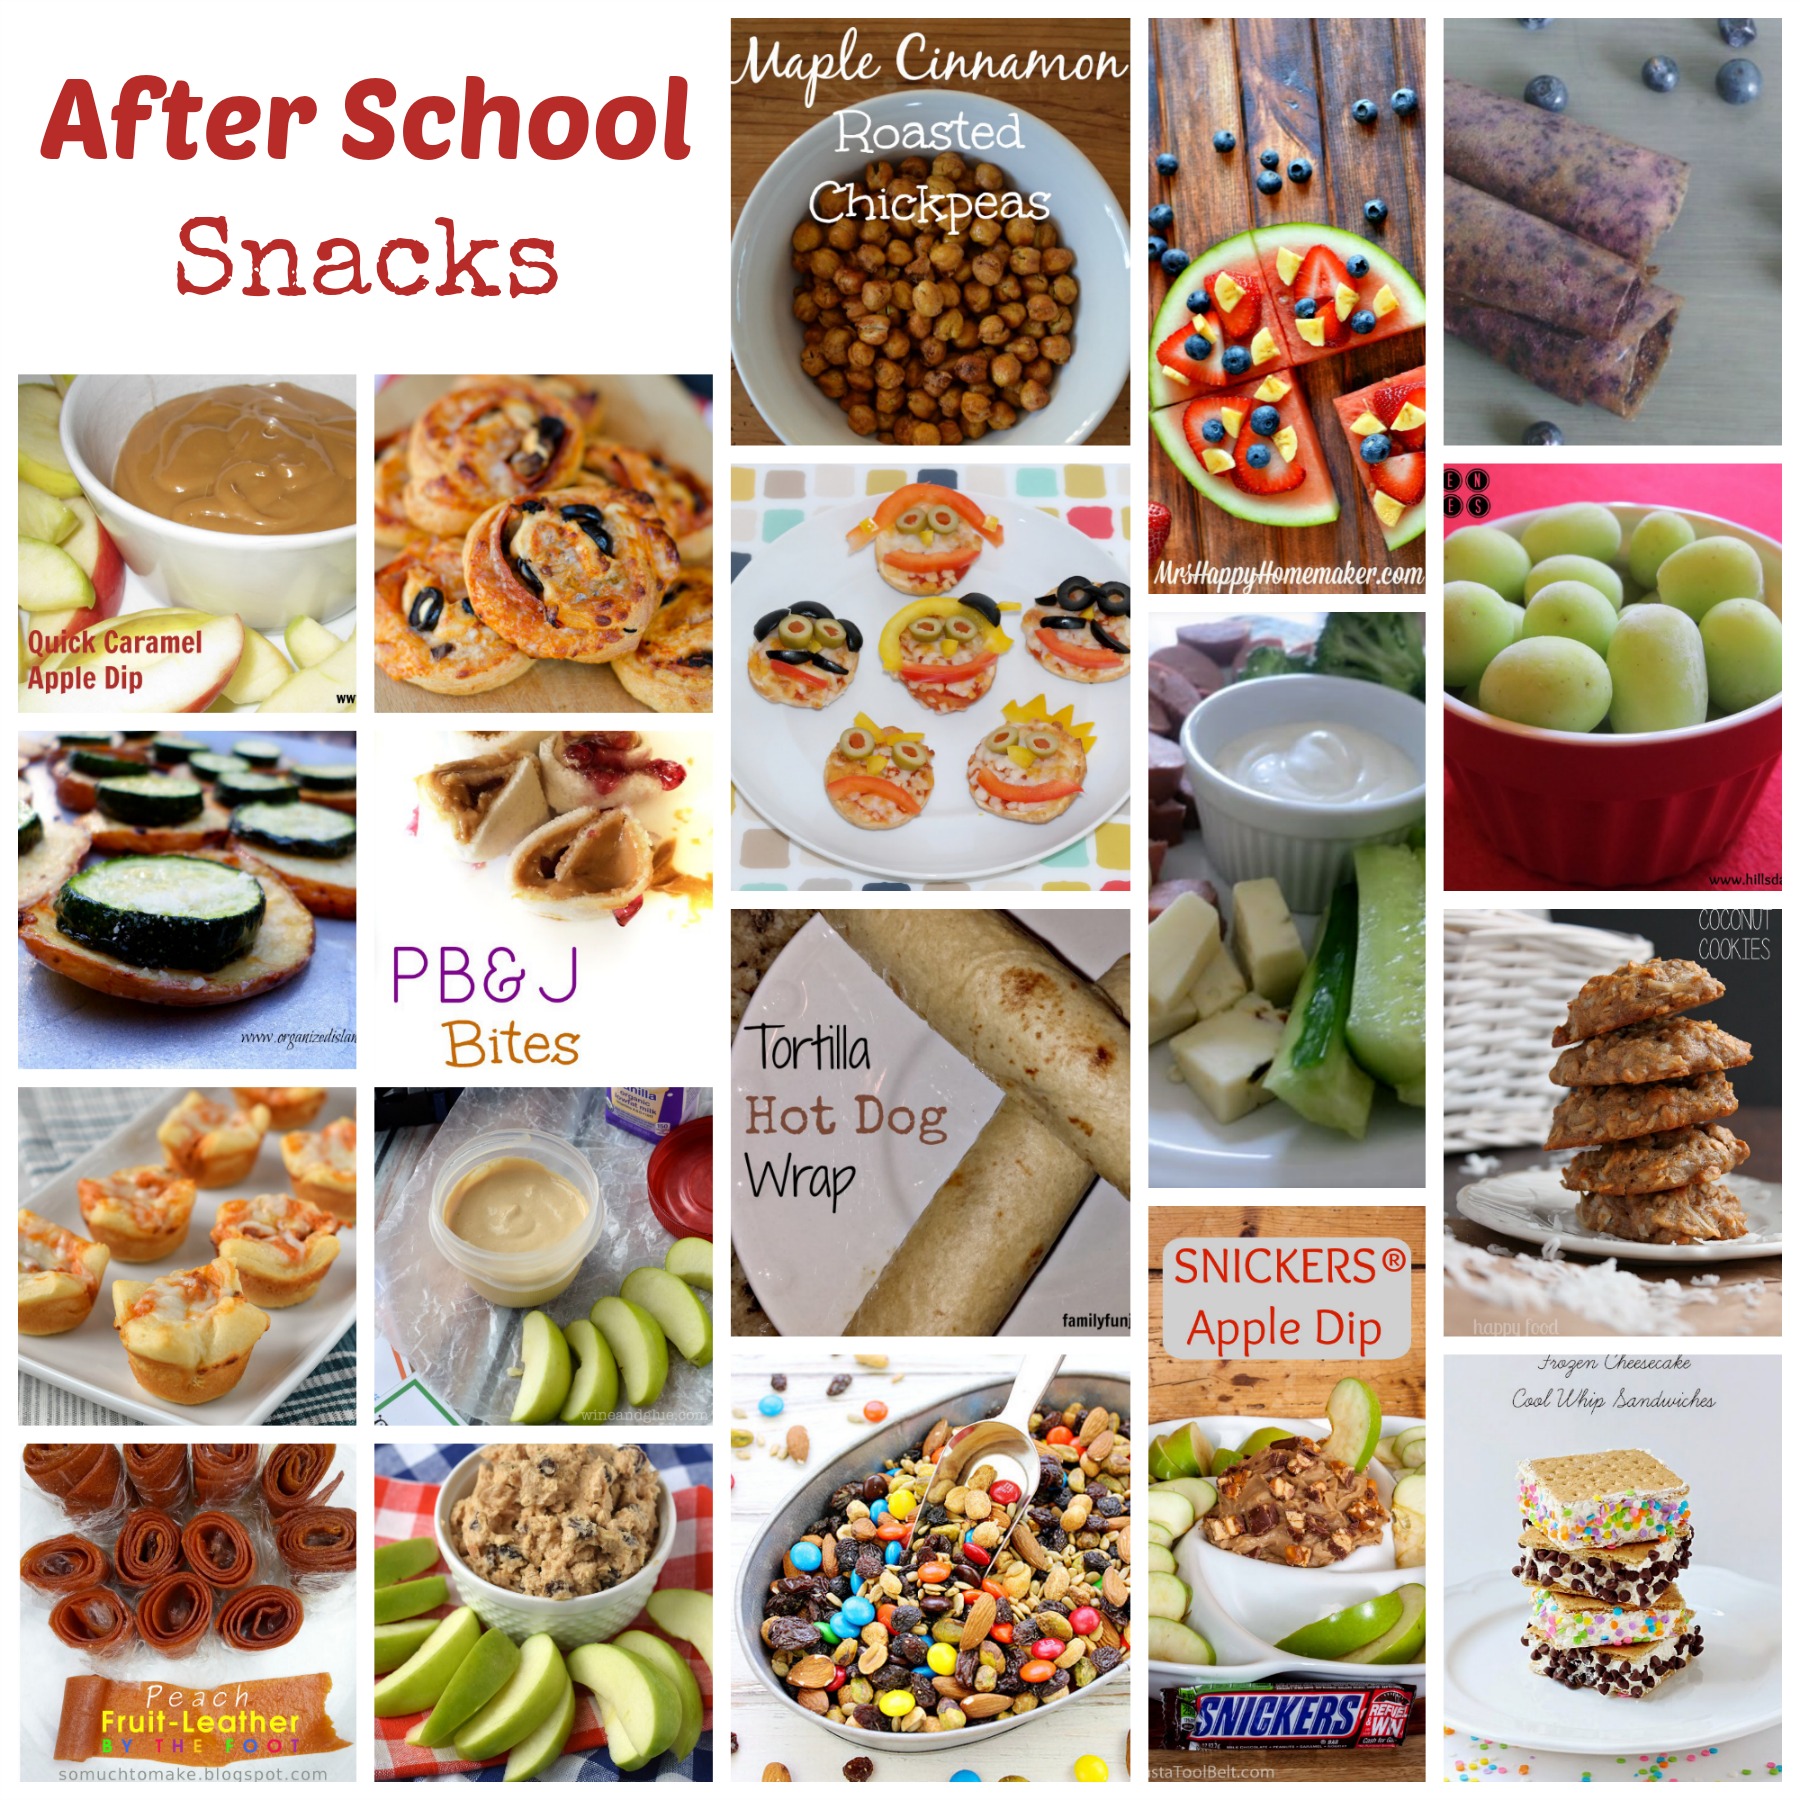 Fun ideas for after school snacks.